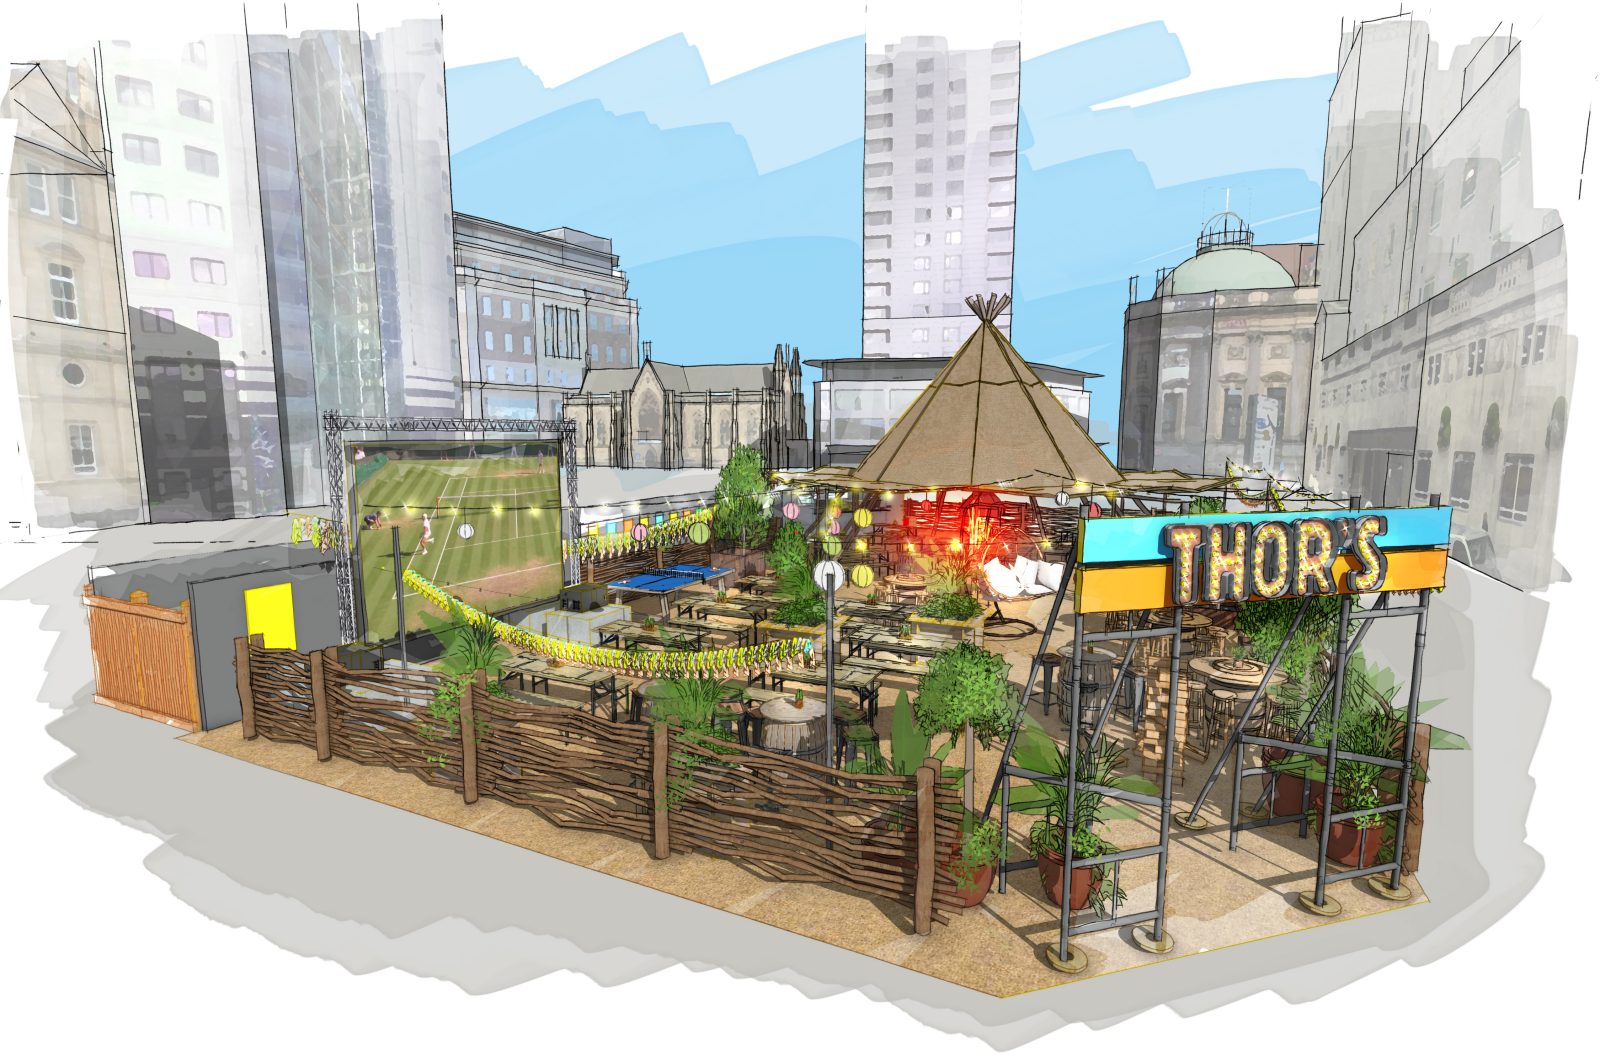 Thor's Tipi is opening a pop-up bar in Leeds City Square. Credit: Supplied